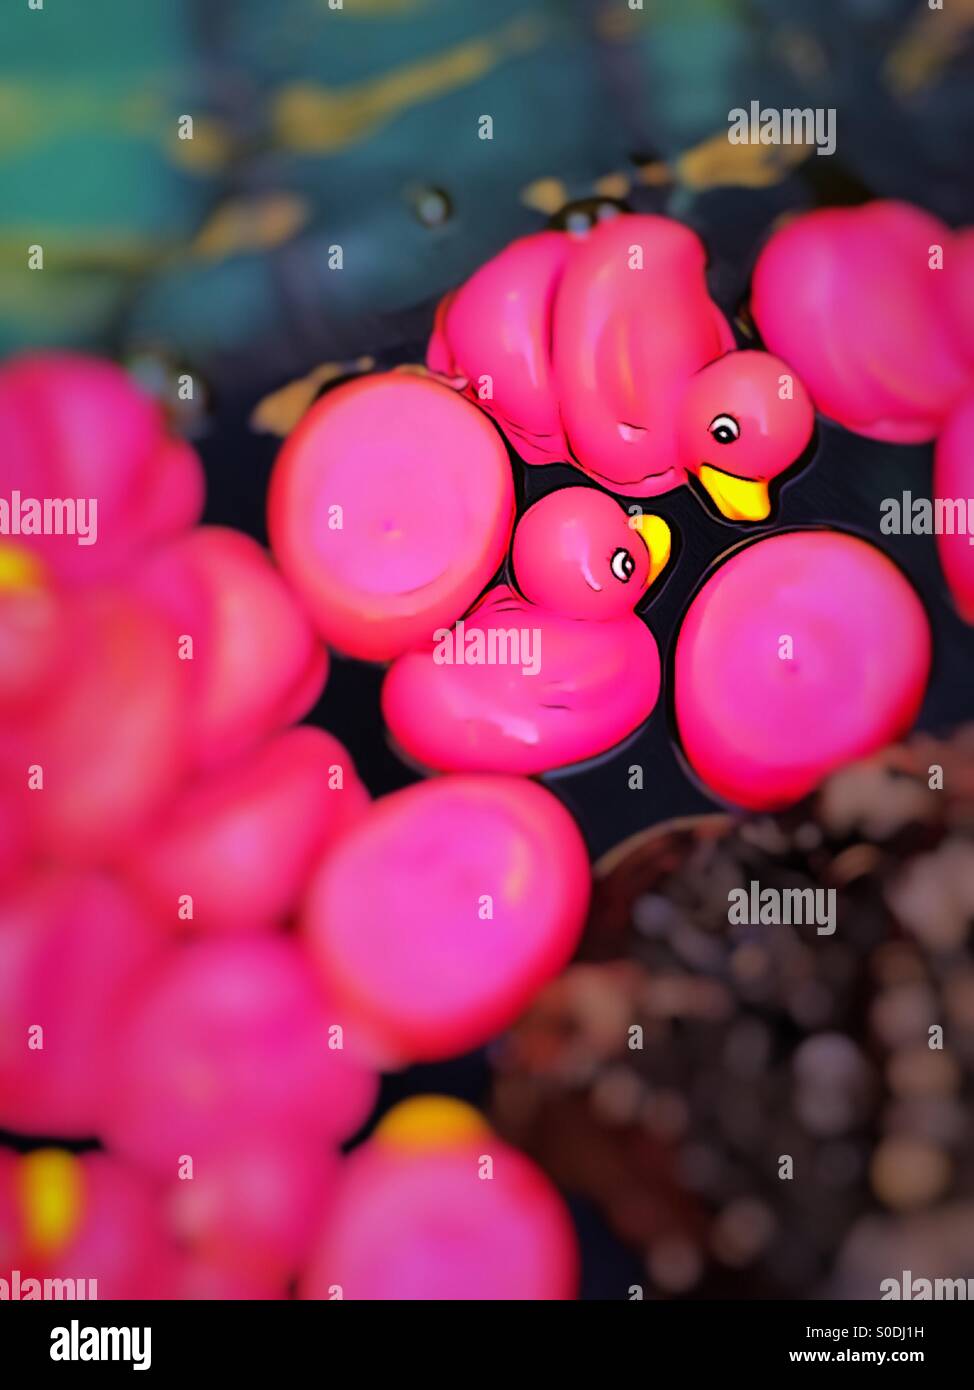 Pink Rubber Duckies Stock Photo